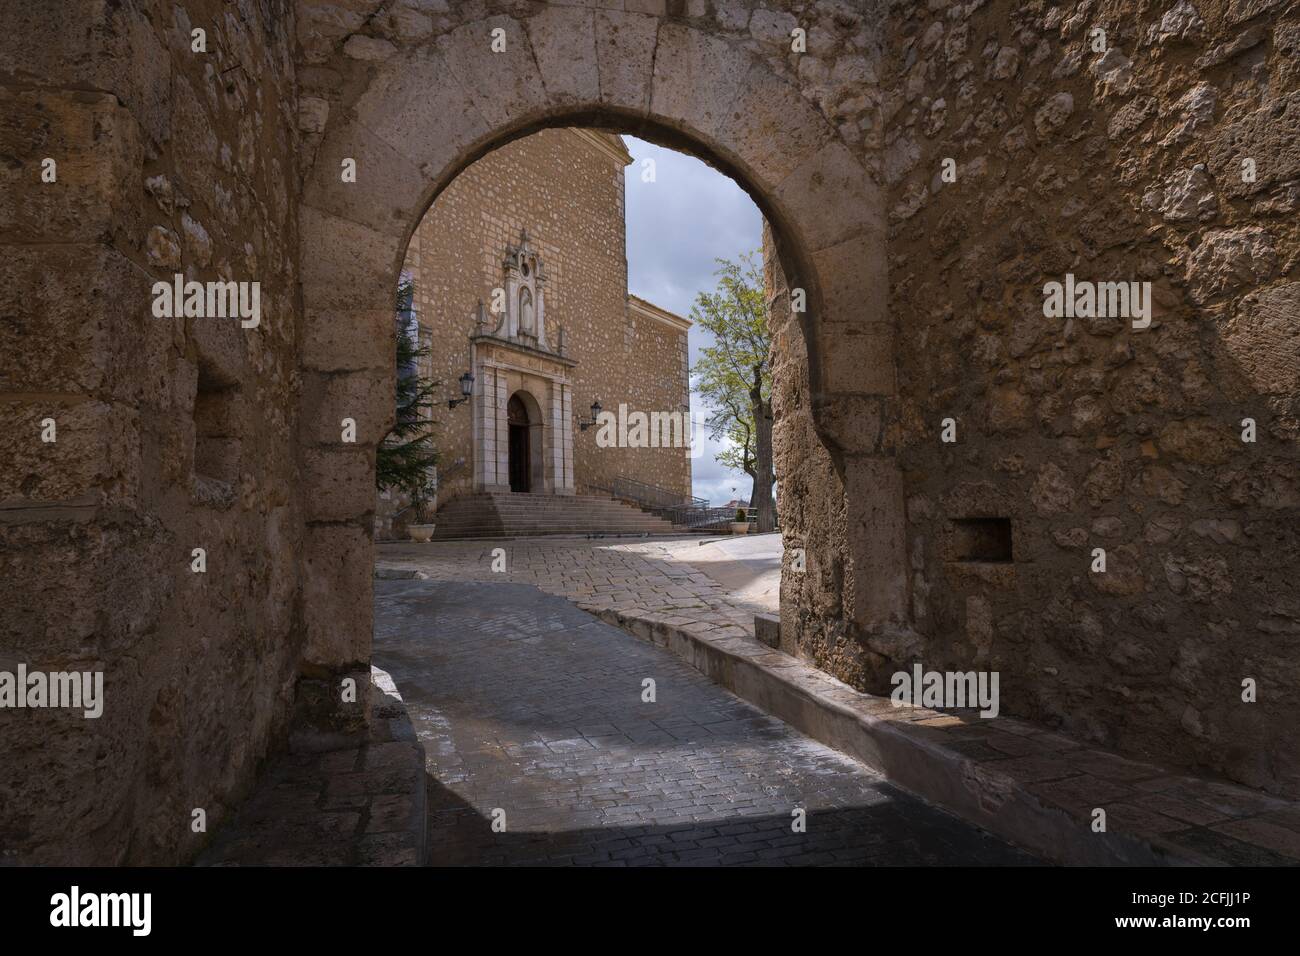 View of the main facade of the Church of Our Lady of the Assumption through the entrance portico to the church compound in Tarancón, Cuenca, Spain Stock Photo